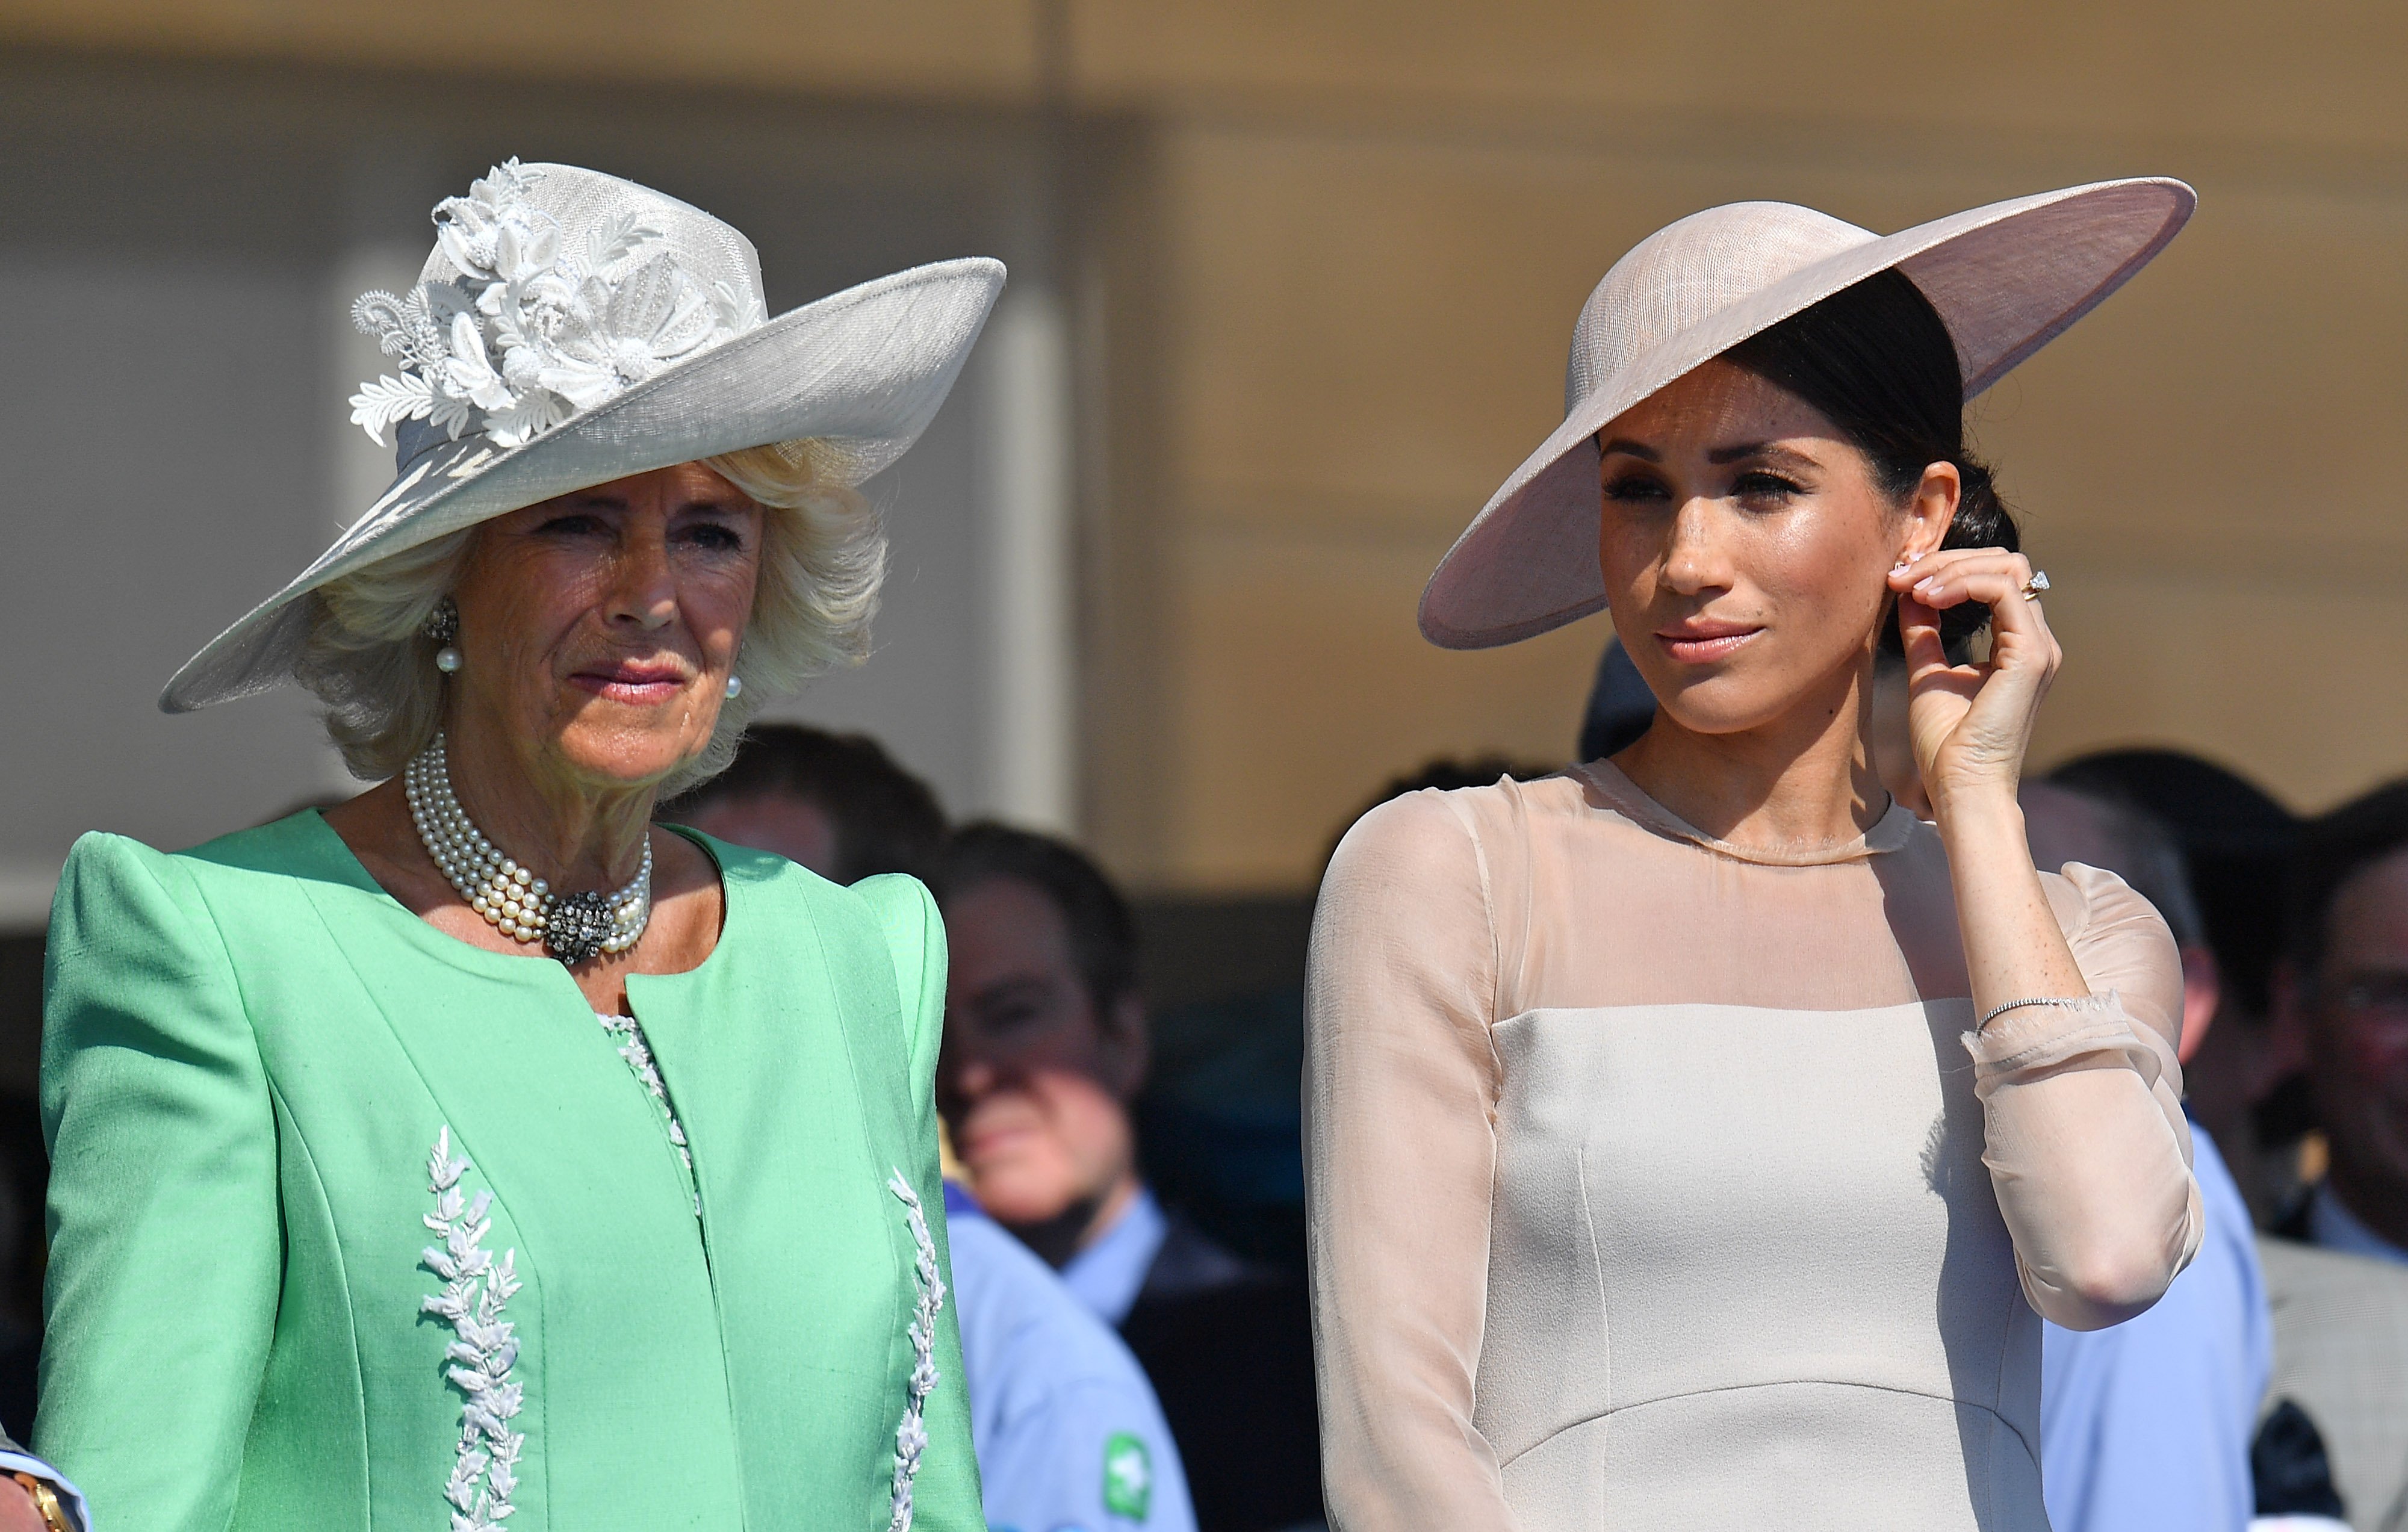 Duchess Camilla and Duchess Meghan at Prince Charles's 70th Birthday Garden Party at Buckingham Palace in London on May 22, 2018. | Source: Getty Images